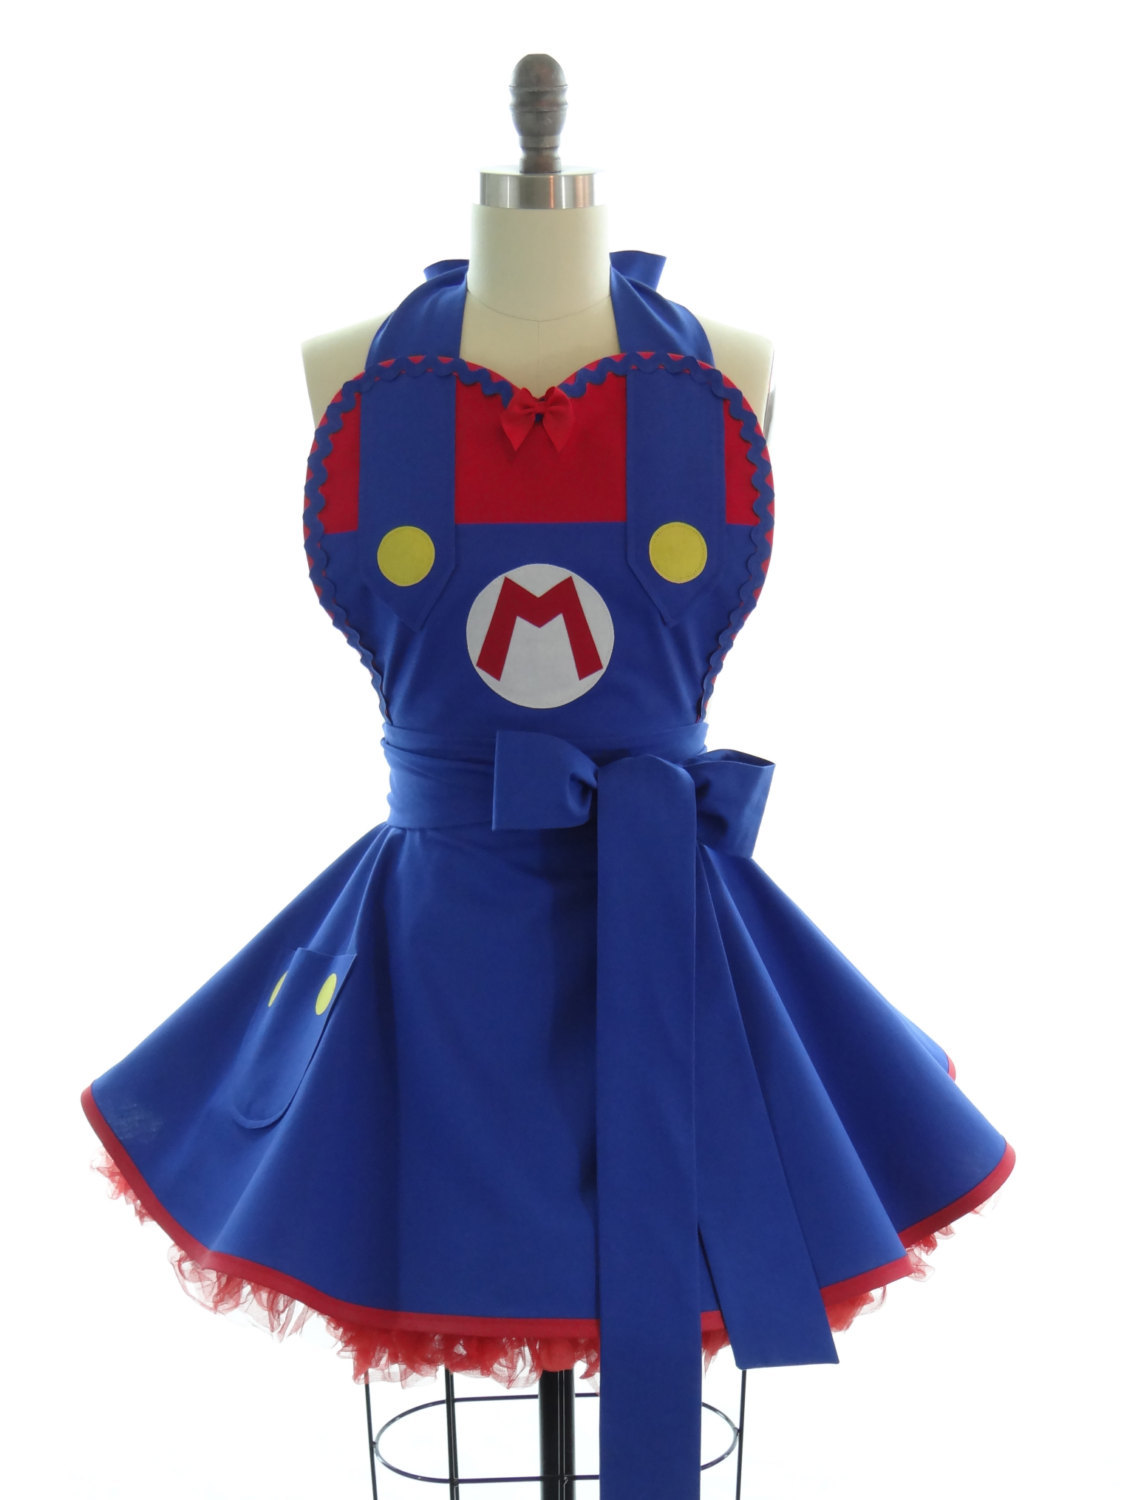 badlittlekitten:  geekpinata:  Adorable geeky aprons from Bambino Amore. Spotted